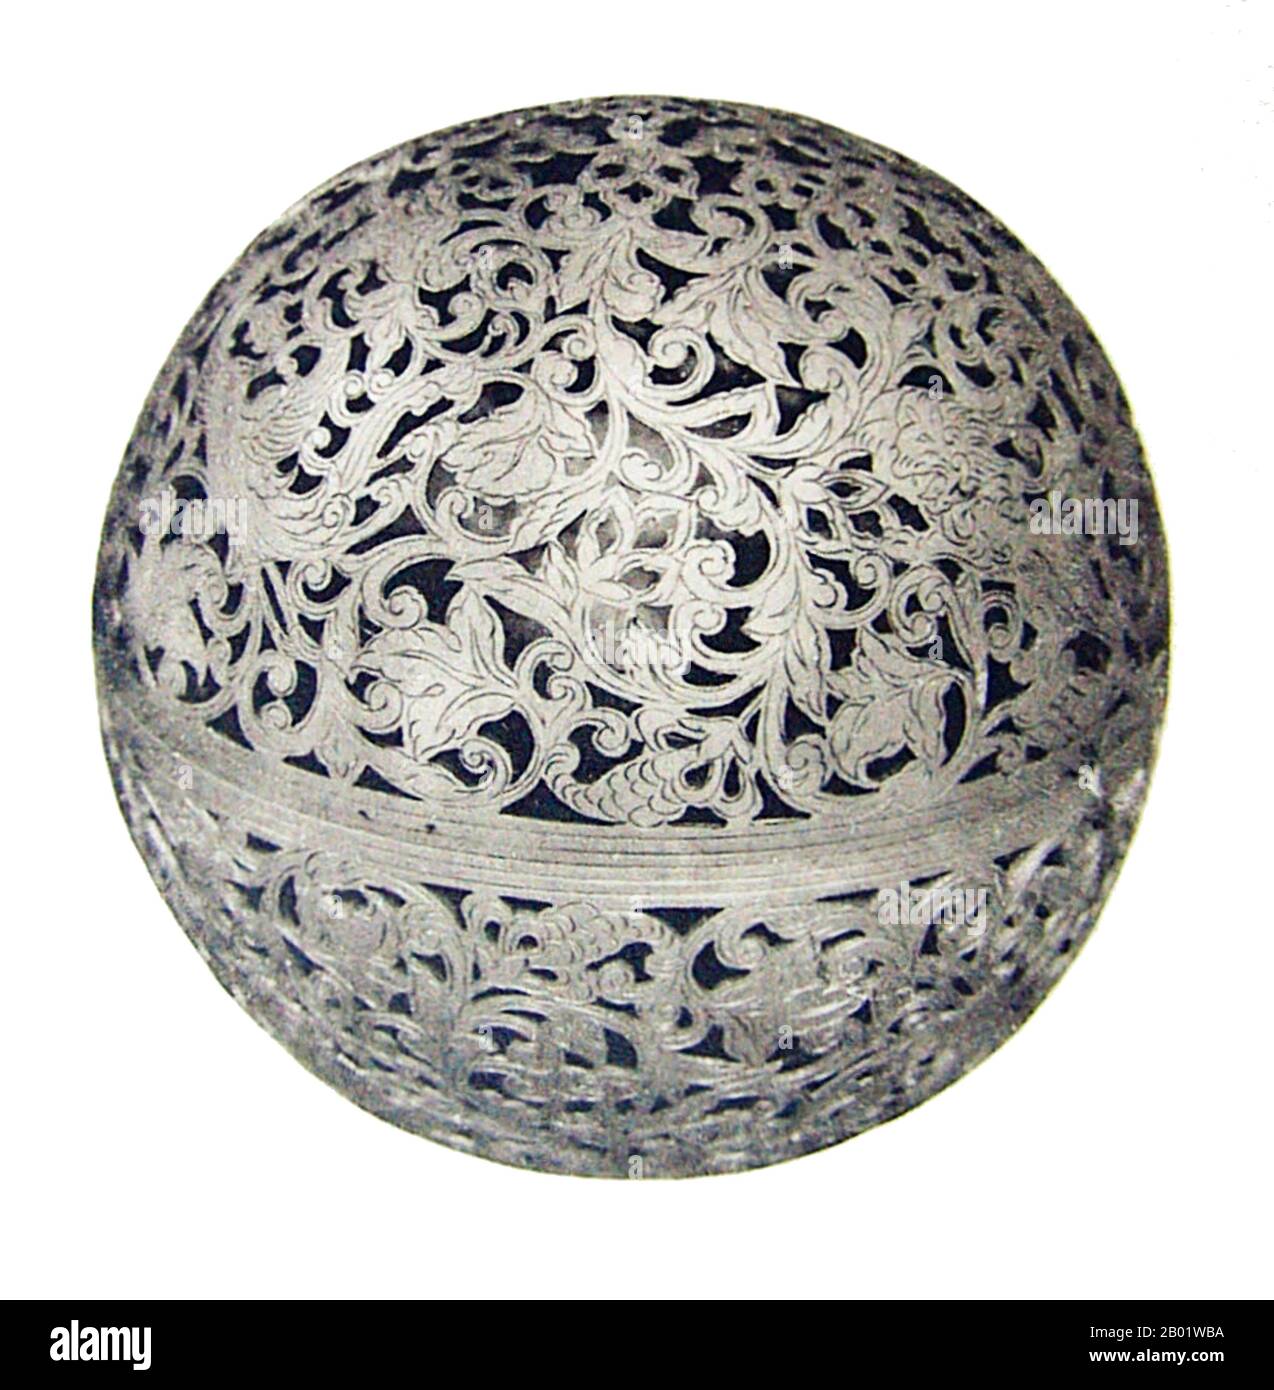 Japan: A spherical silver incense burner, Shosoin Treasury, 8th century CE.  The Shōsō-in is the treasure house that belongs to Tōdai-ji, Nara. The Shōsō-in houses artifacts connected to Emperor Shōmu (701-756) and Empress Kōmyō (701-760), as well as arts and crafts of the Tenpyō period of Japanese history.  After the Meiji Restoration, the Shōsō-in came under the administration of the national government, and since World War II has been under the administration of the Imperial Household Agency. It is on the UNESCO register of World Heritage Sites. Stock Photo